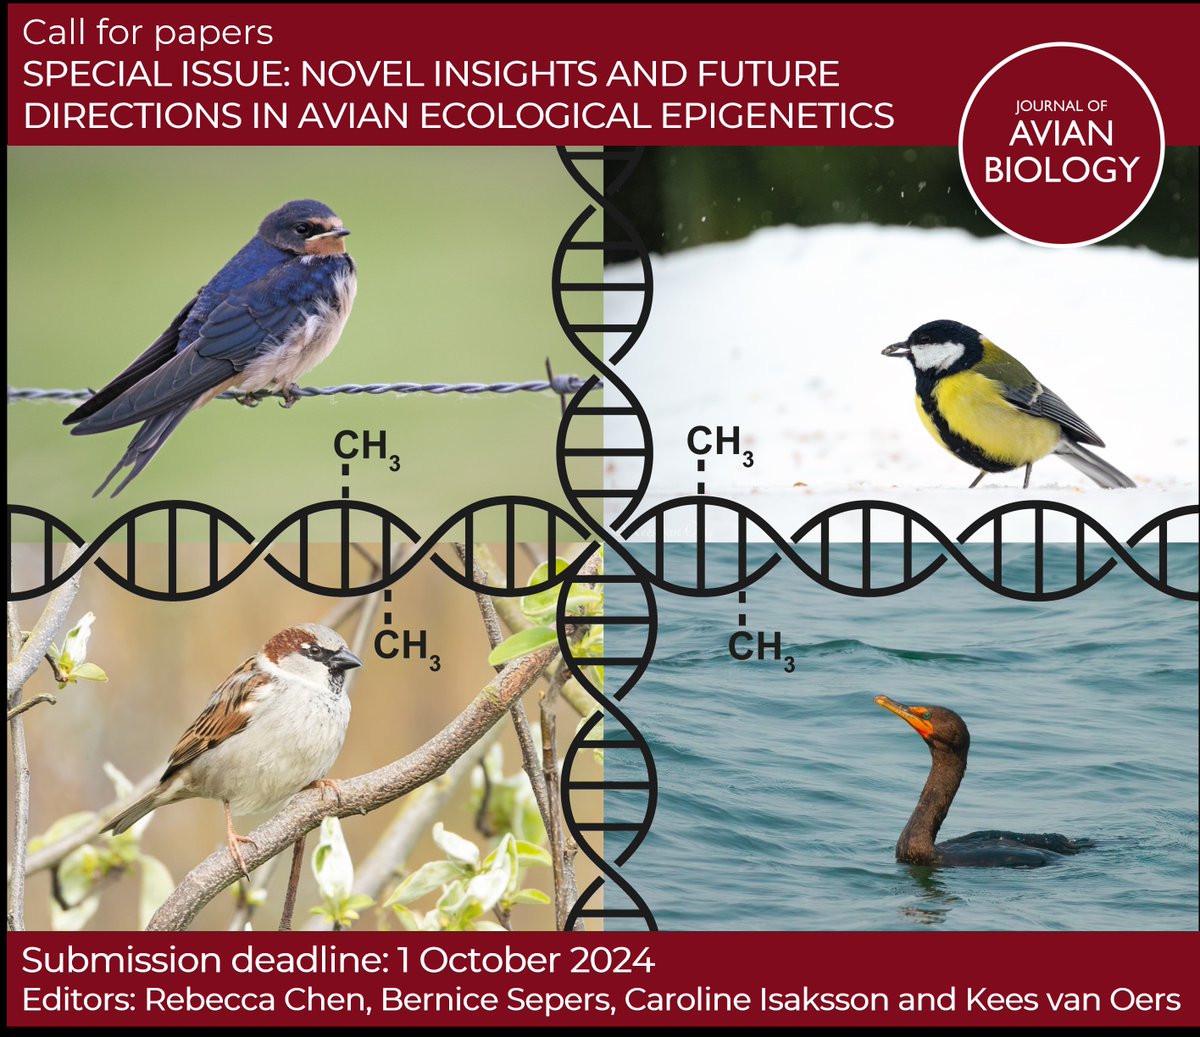 📢 CALL FOR PAPERS 📢 Special issue: Novel insights and future directions in avian ecological epigenetics More info: vist.ly/rfwm Guest editors: @BerniceSepers @rebeccas_chen @KvanOers @CarolineIsak Submission deadline: 1 October 2024 #ornithology #epigenetics